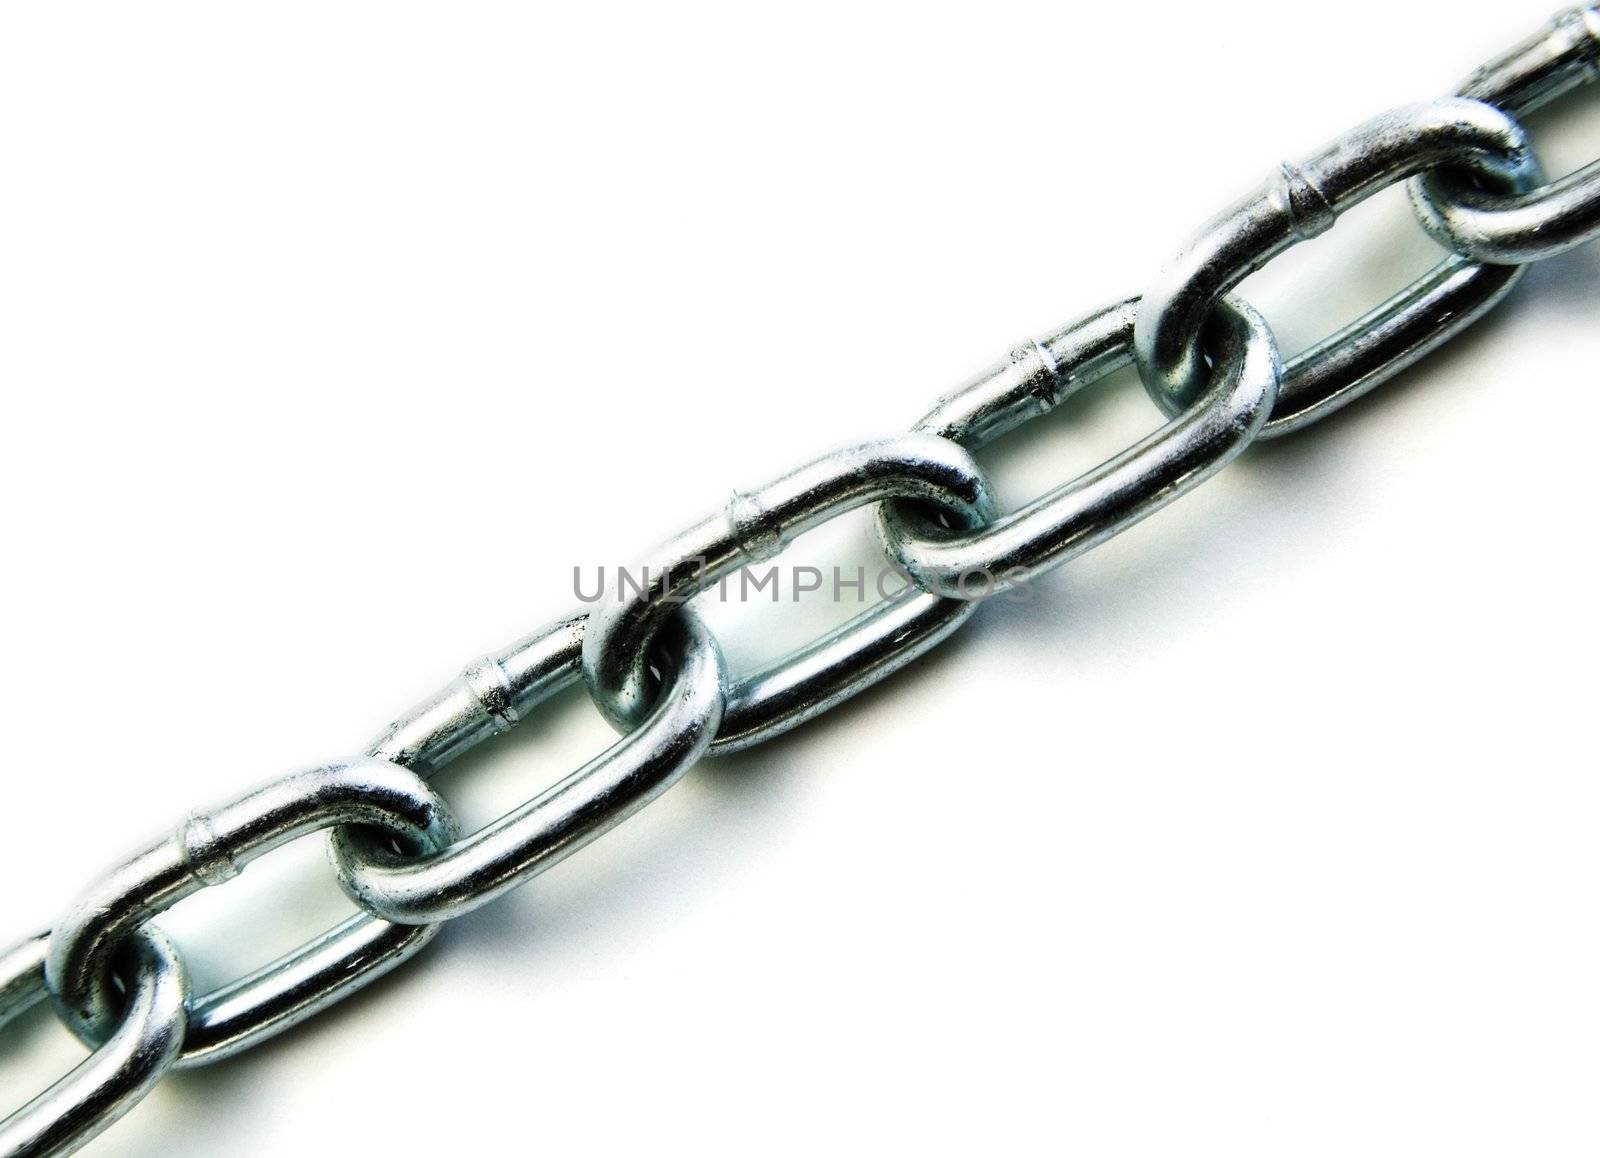 Chain Links on a 100% White Background